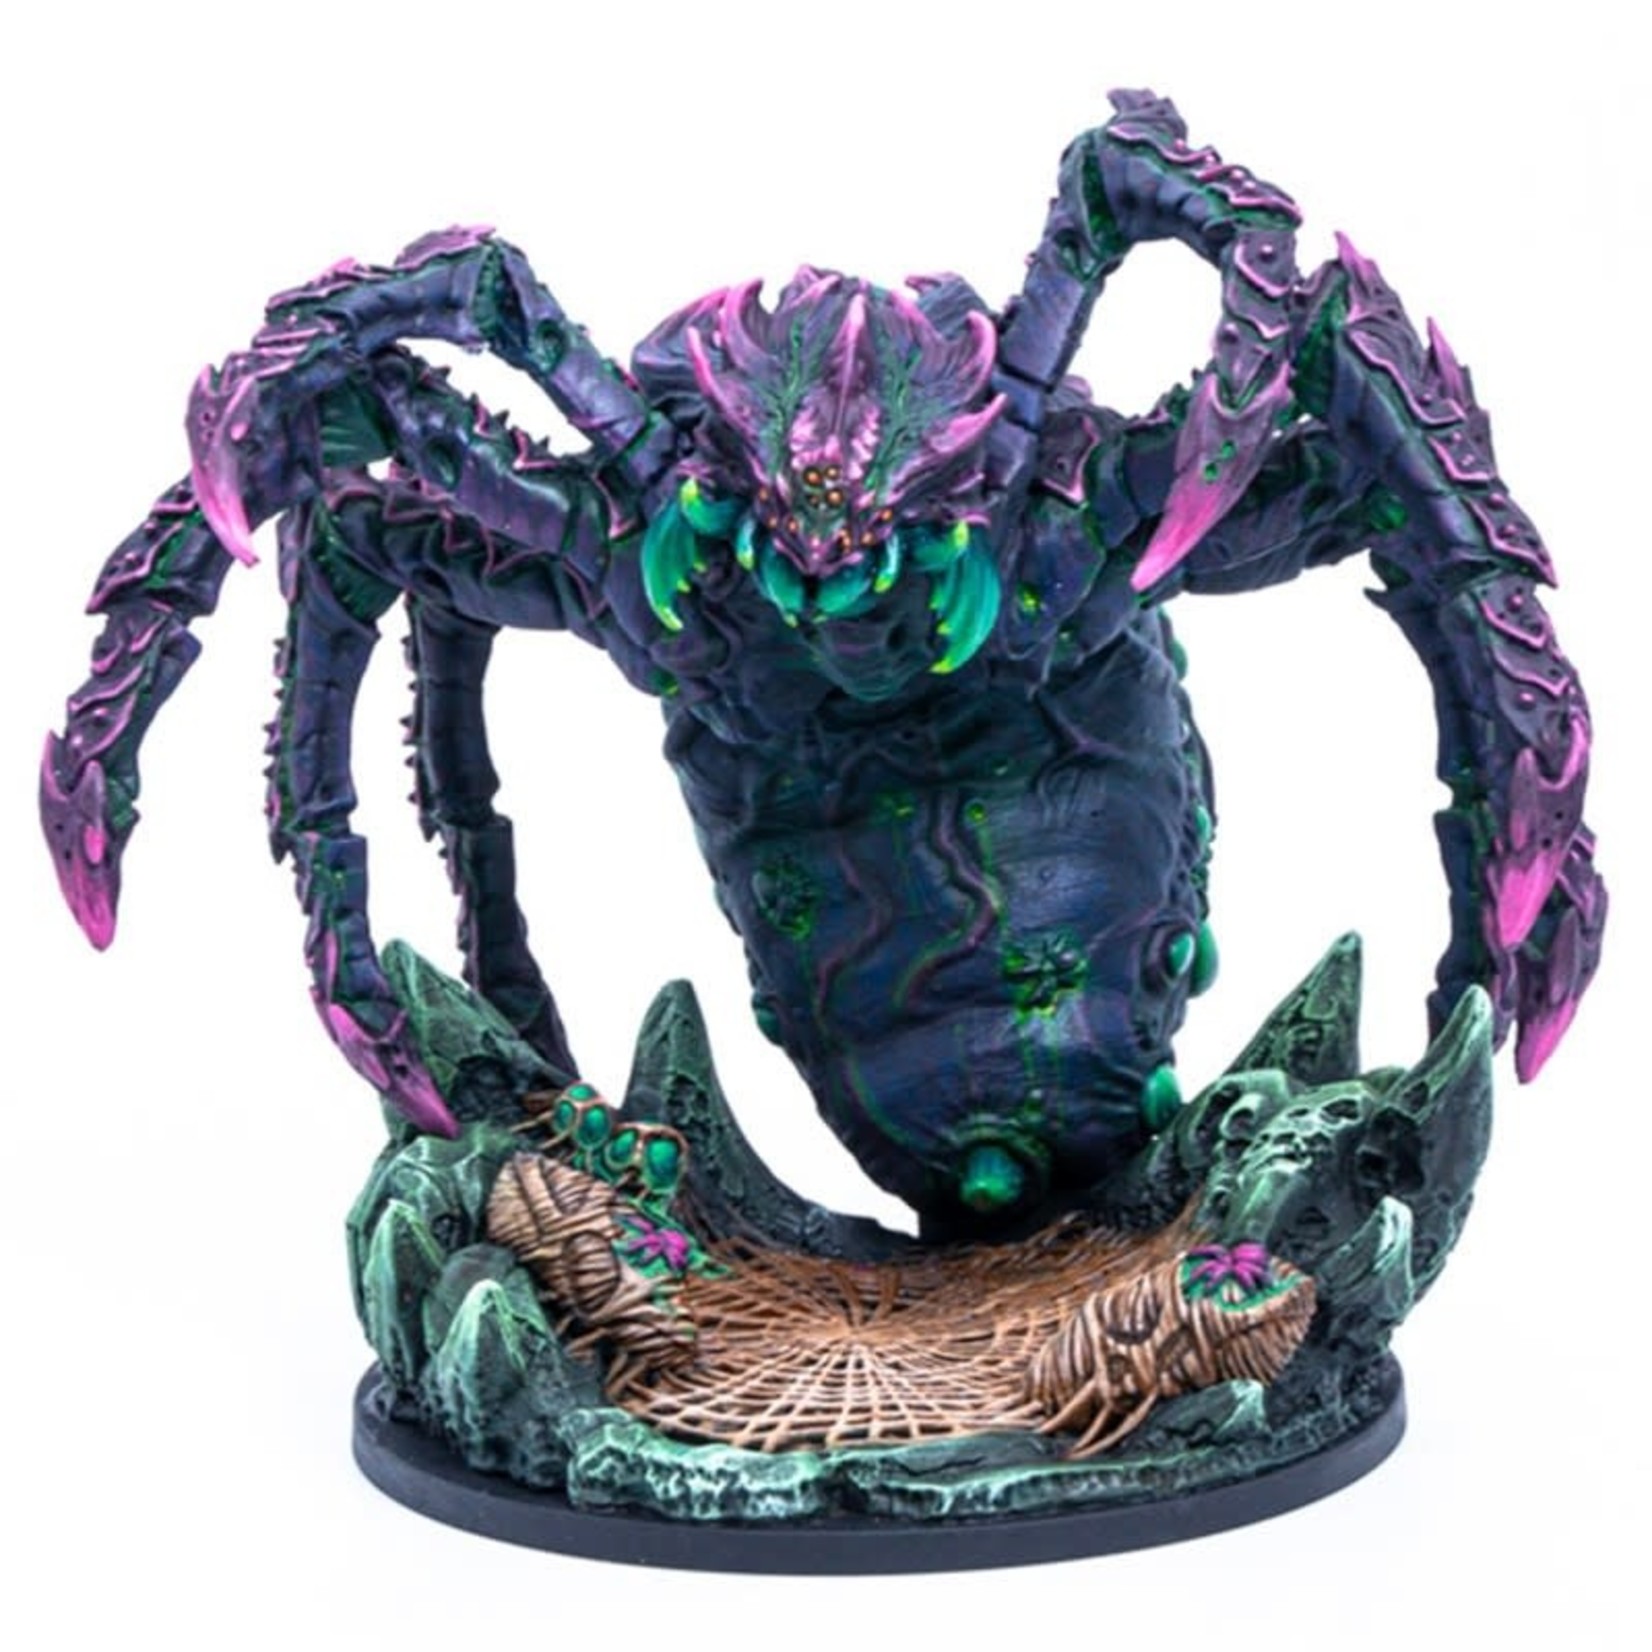 Steamforged Games Epic Encounters: Web of the Spider Tyrant